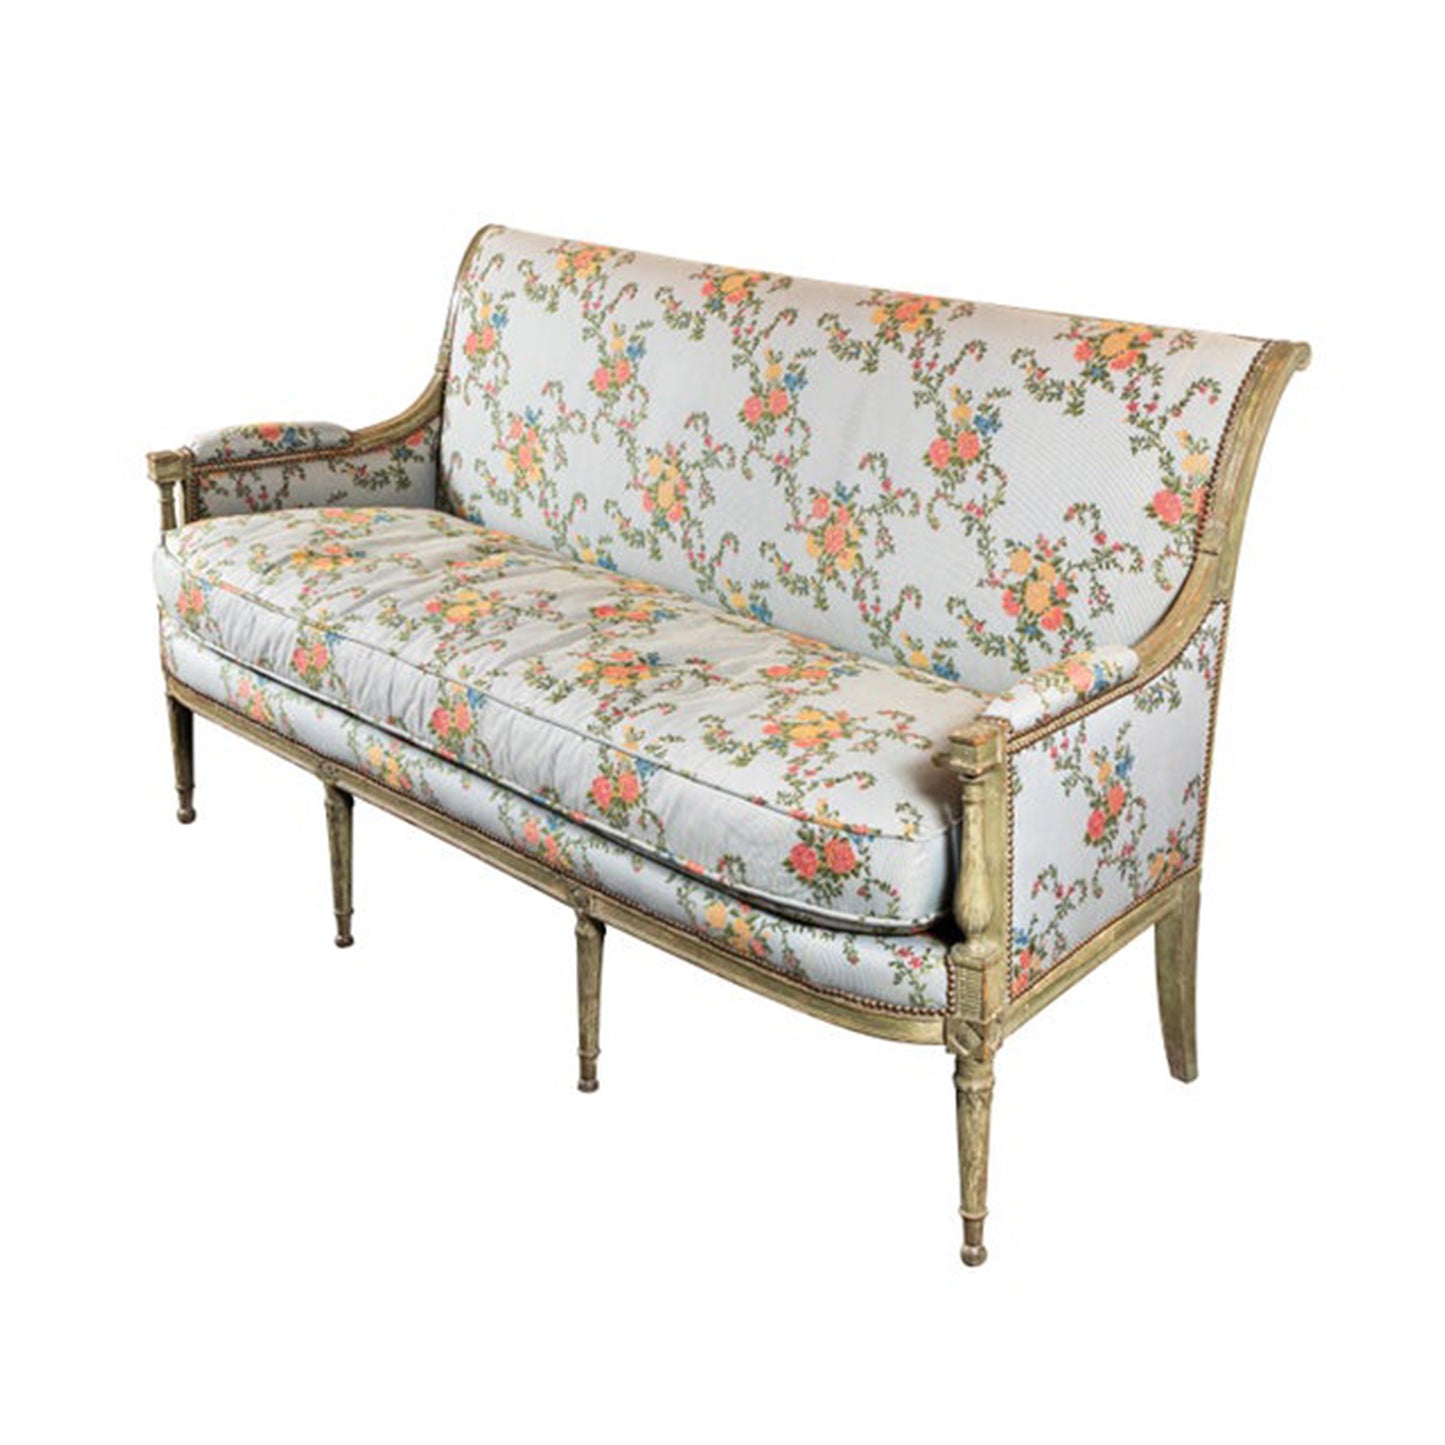 19th Century Painted French Sofa